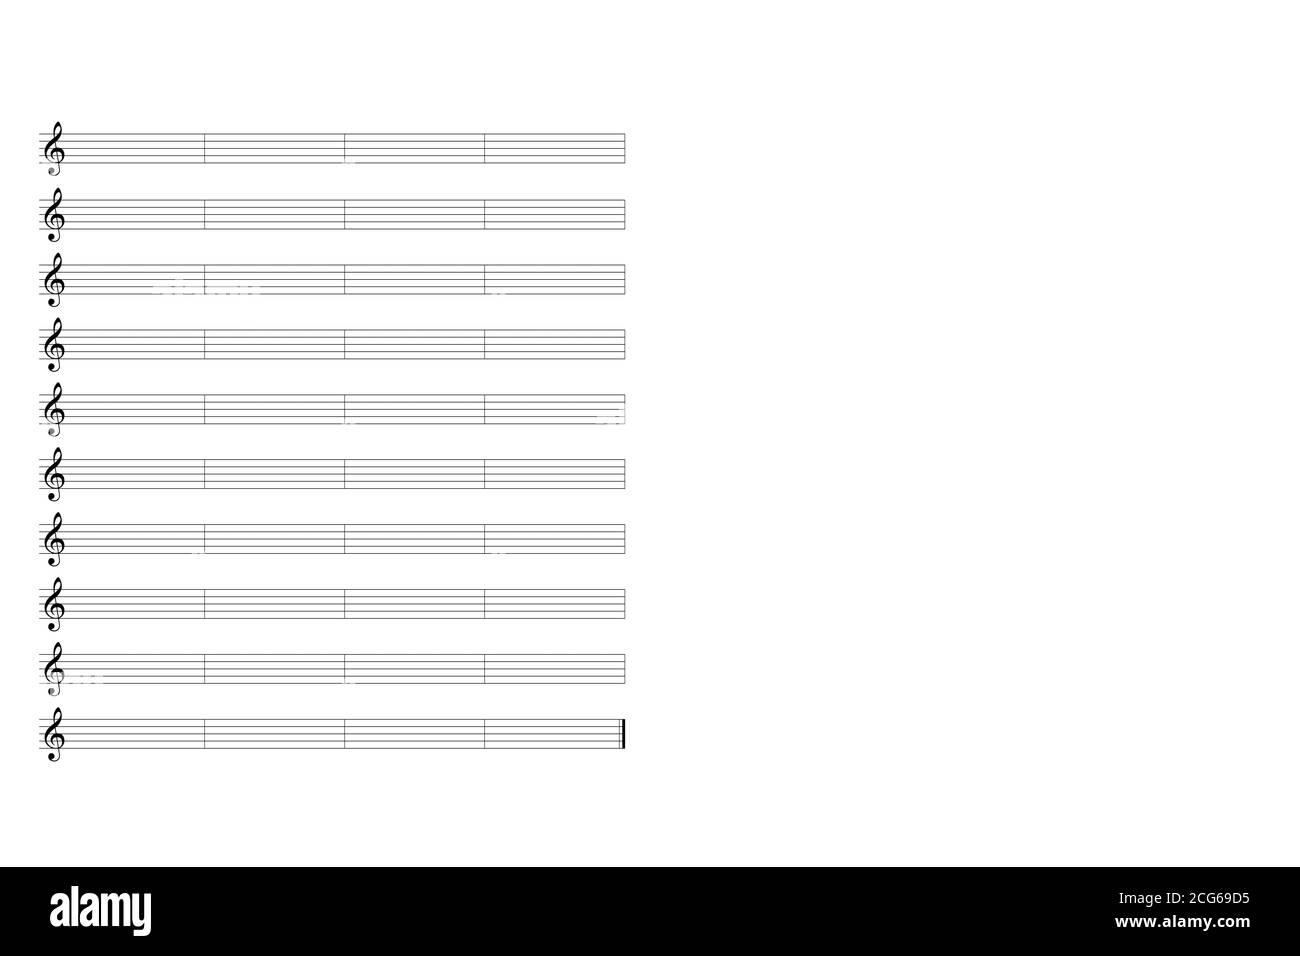 blank music sheet with bars and treble clef on a white background Stock Photo